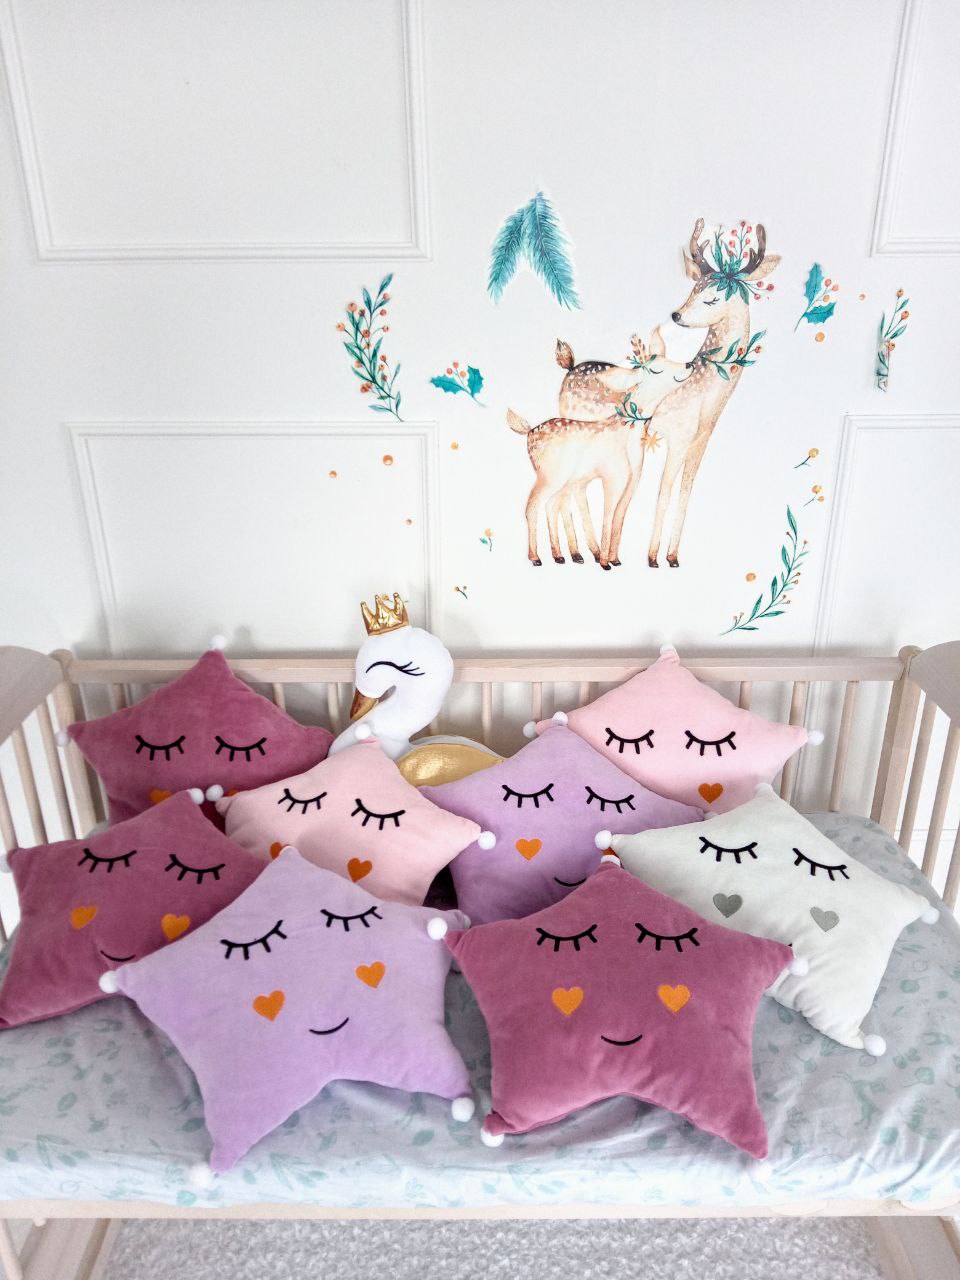 swan pillow and star pillows on the crib